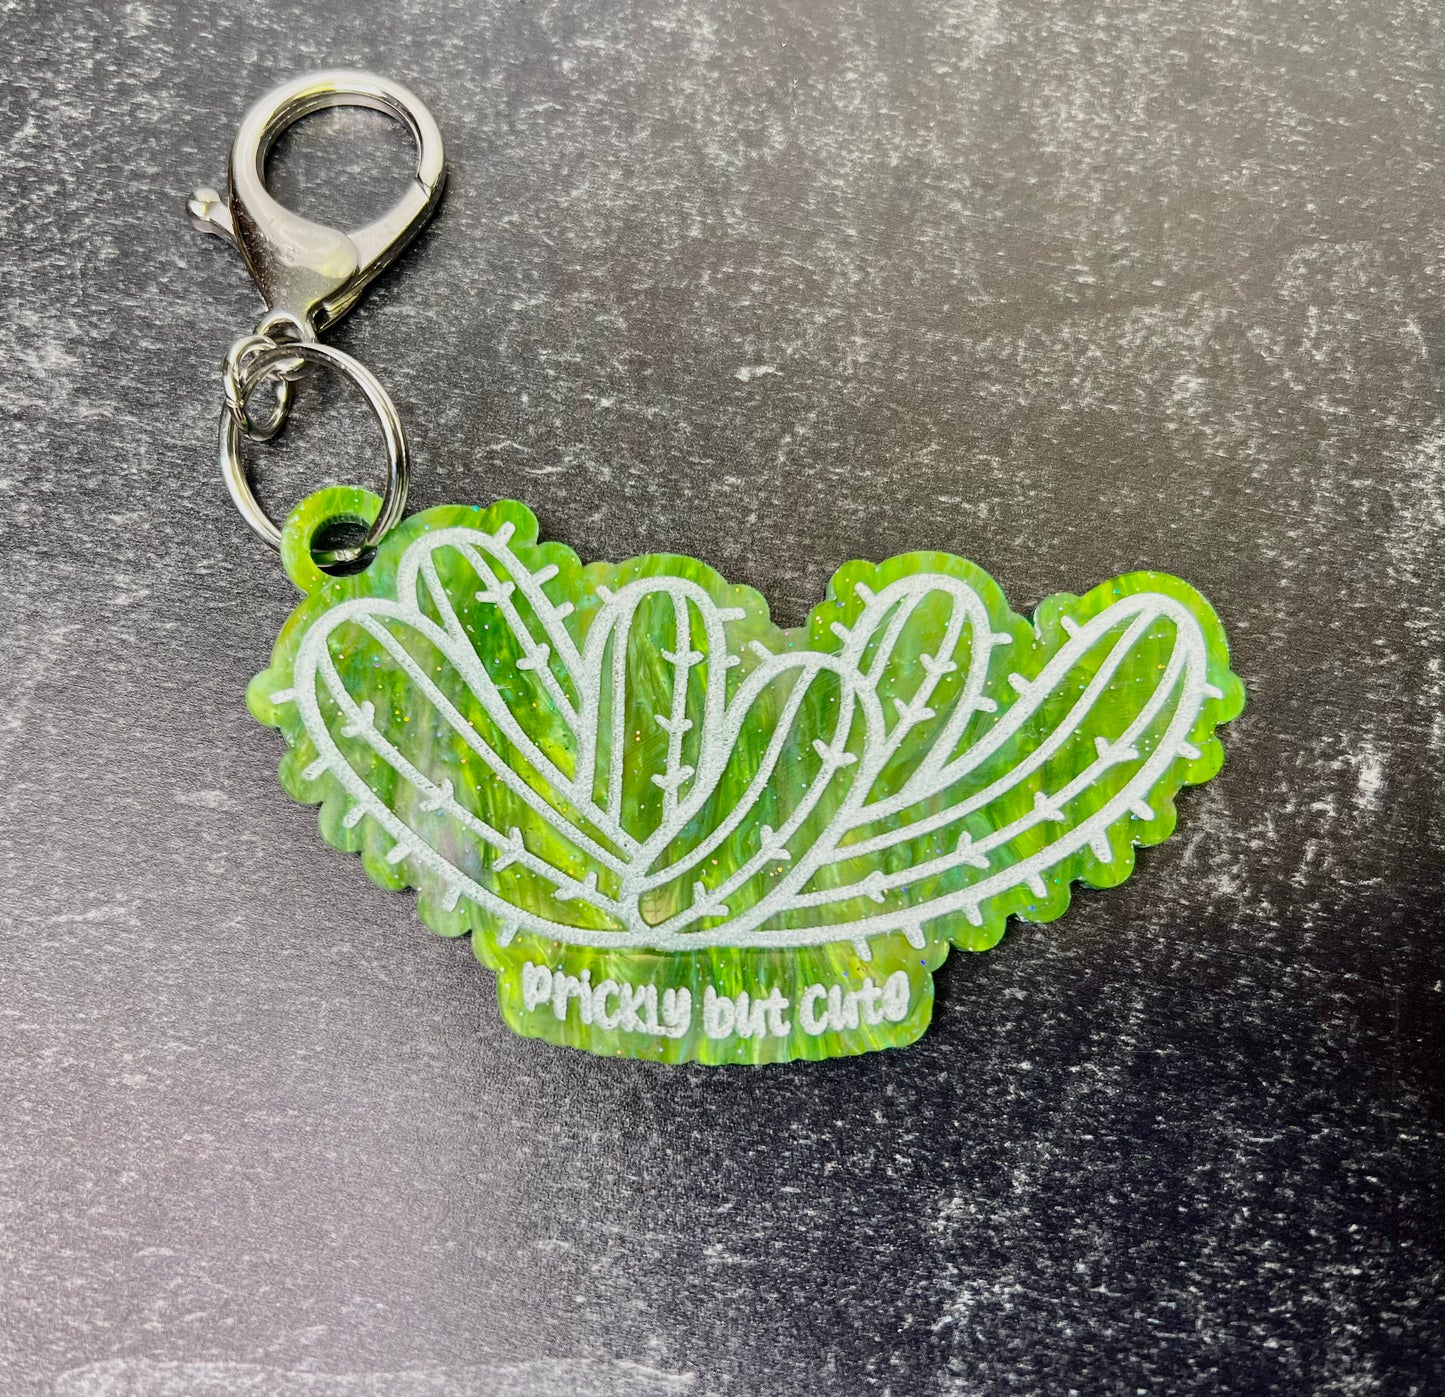 Prickly but Cute Keychain